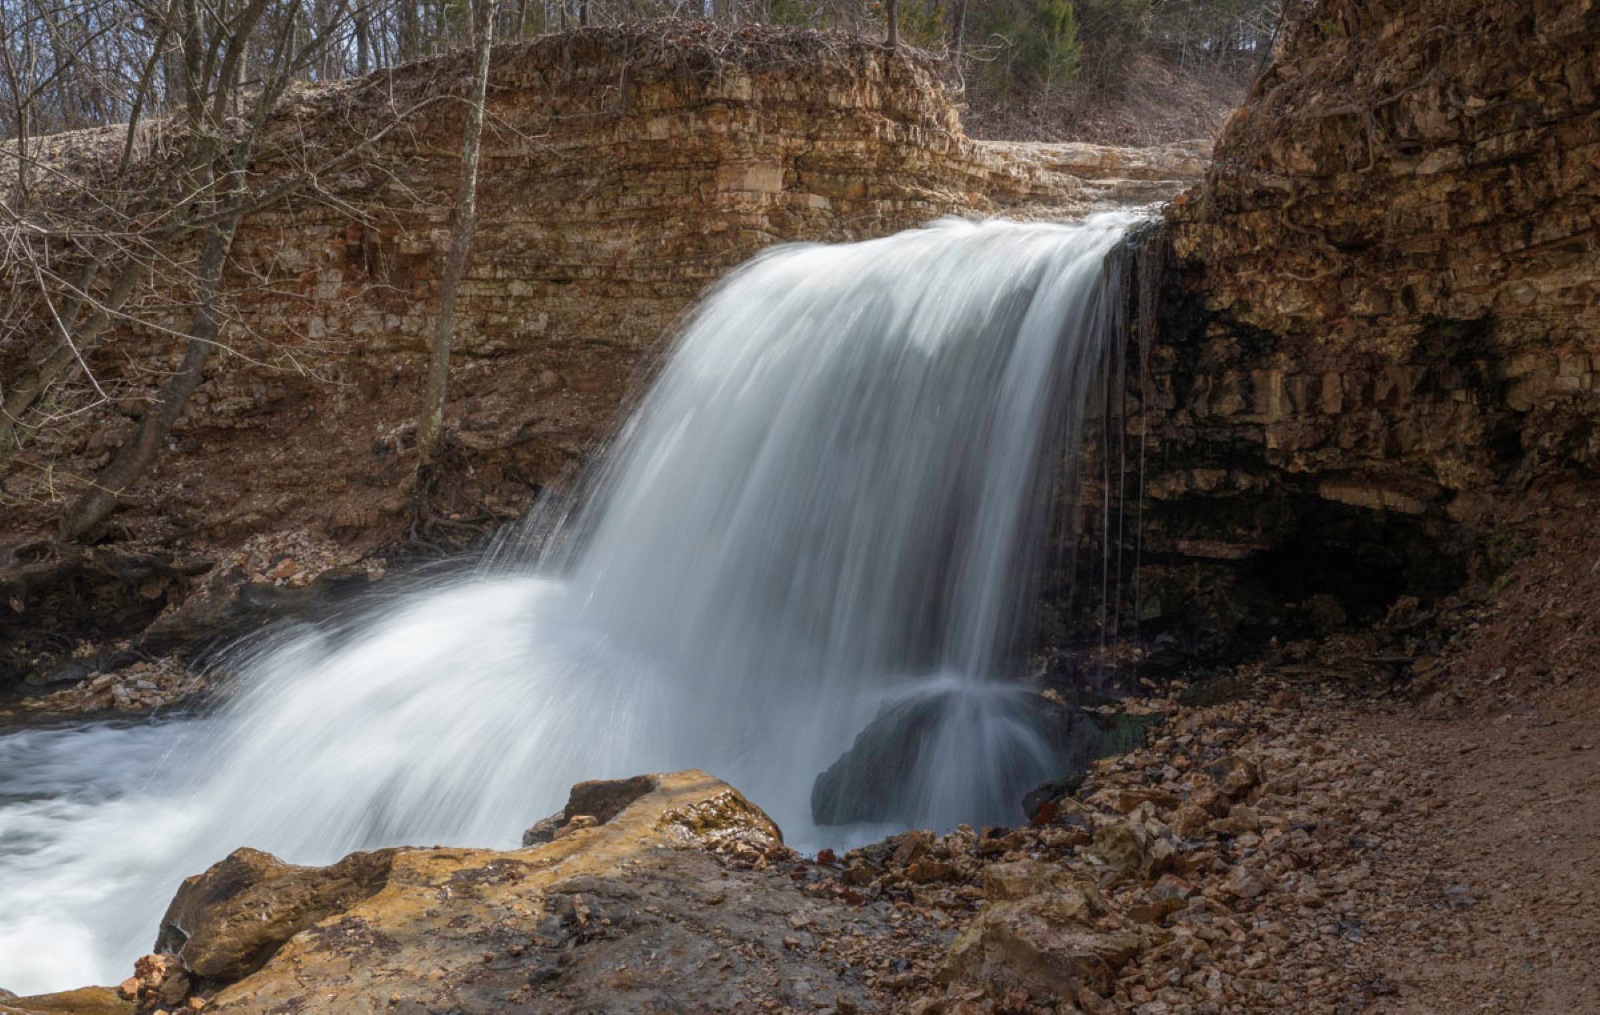 This waterfall is a popular stop for families walking the Tanyard Creek Nature Trail.  (Photo by Sony Hocklander)